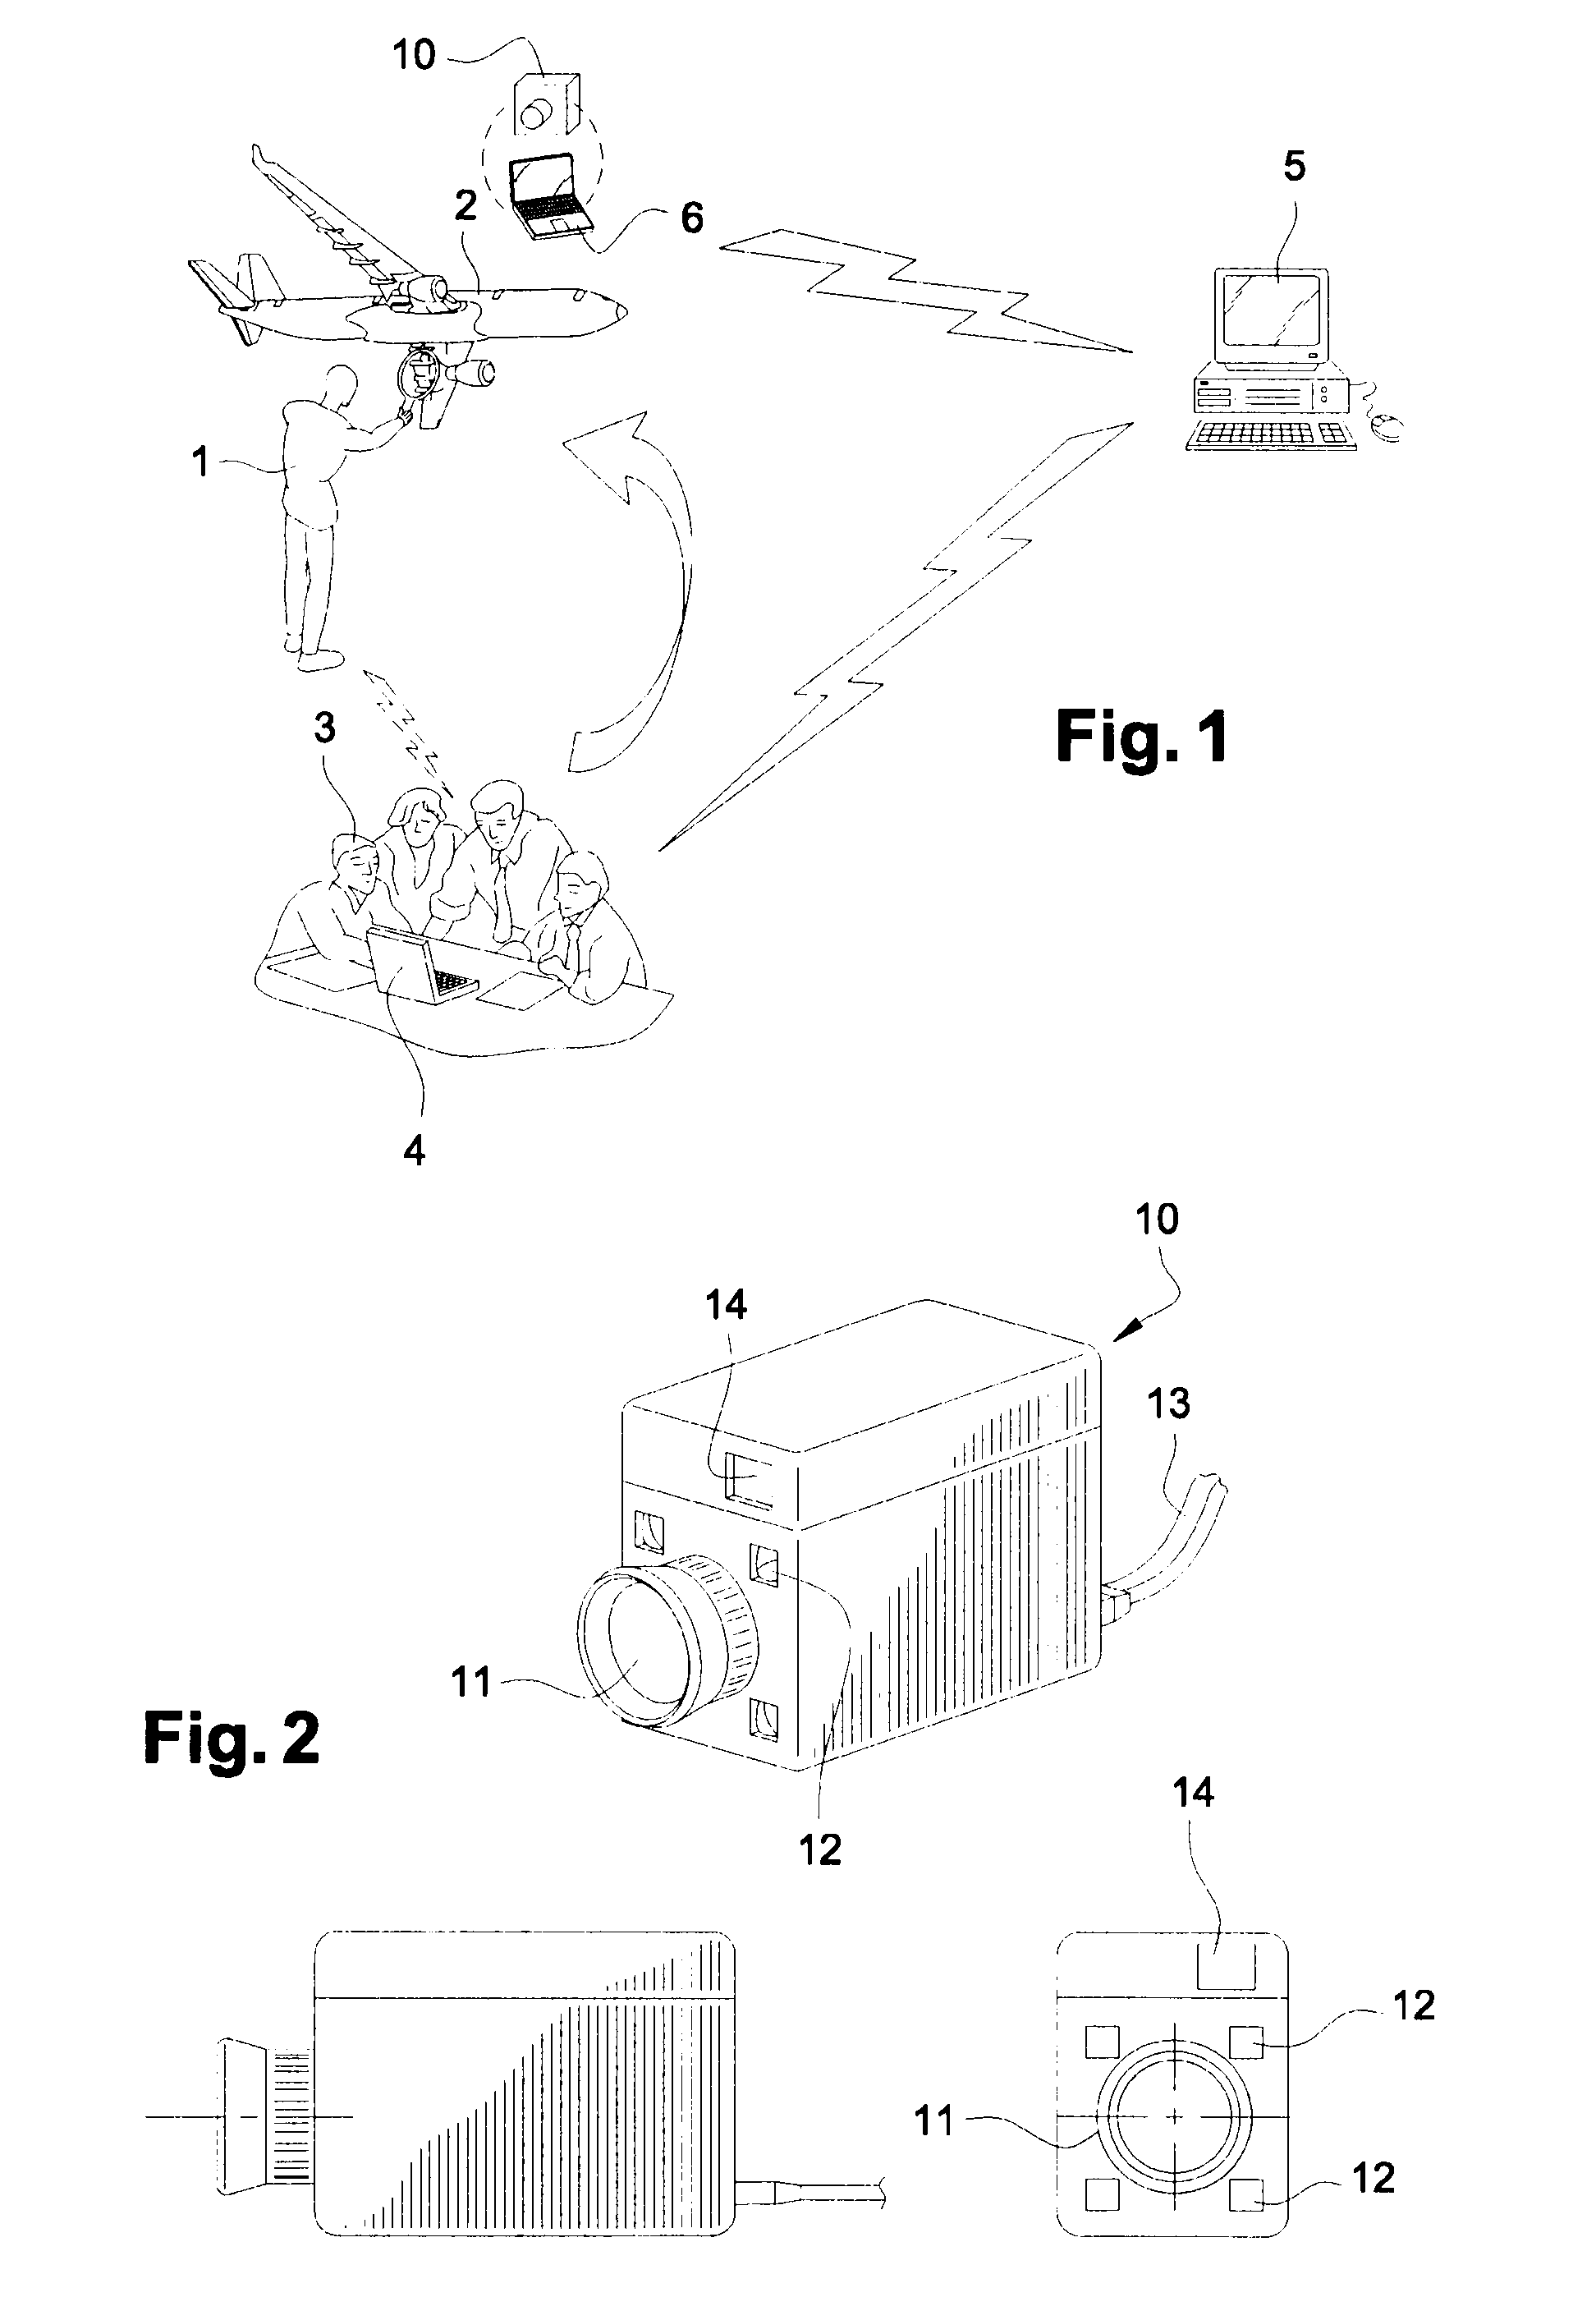 Method and system for the remote inspection of a structure